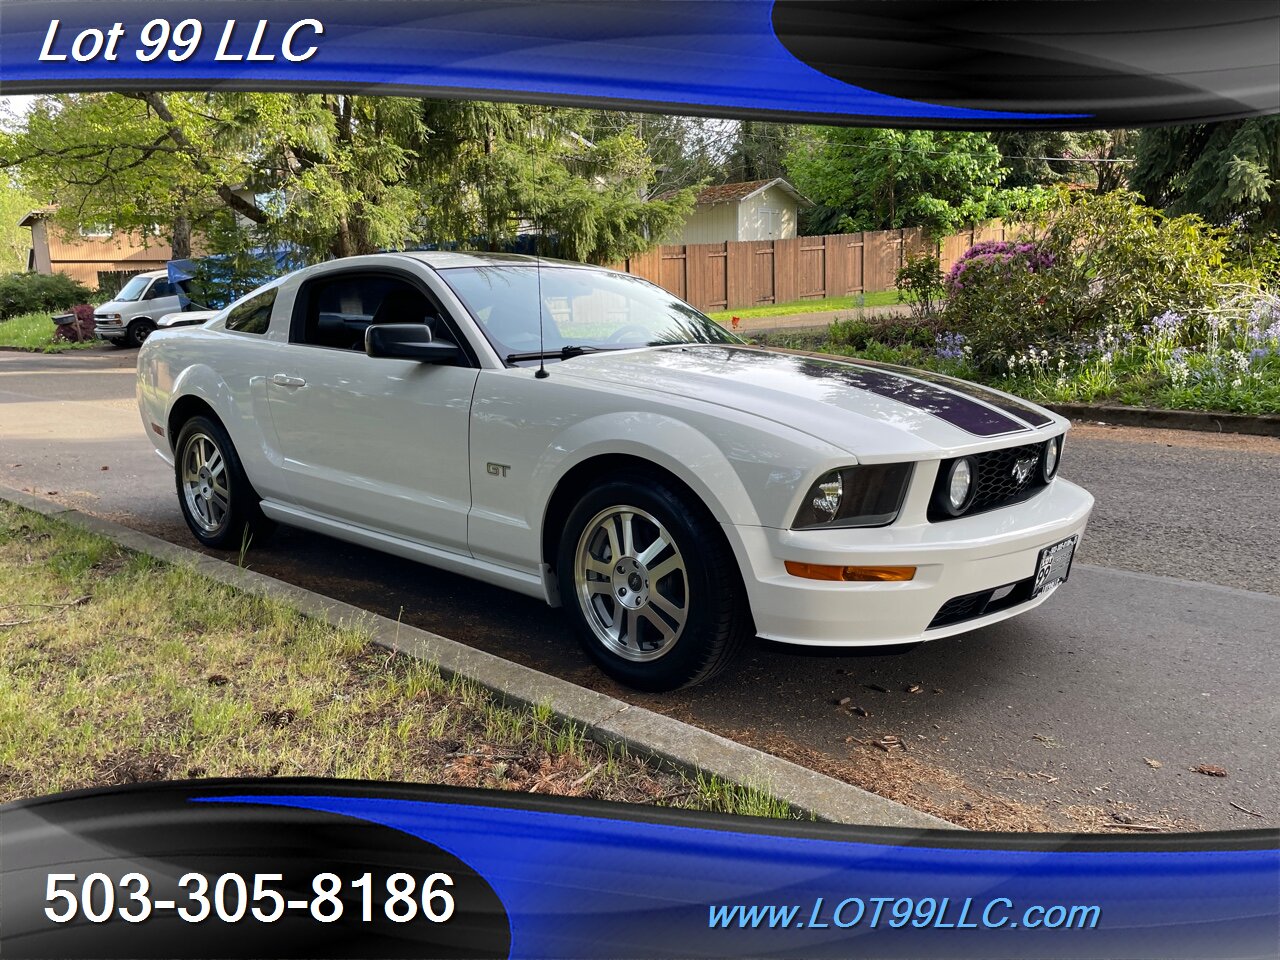 2005 Ford Mustang GT Deluxe 4.6L V8 5 Speed Manual Leather Purple Ra   - Photo 5 - Milwaukie, OR 97267